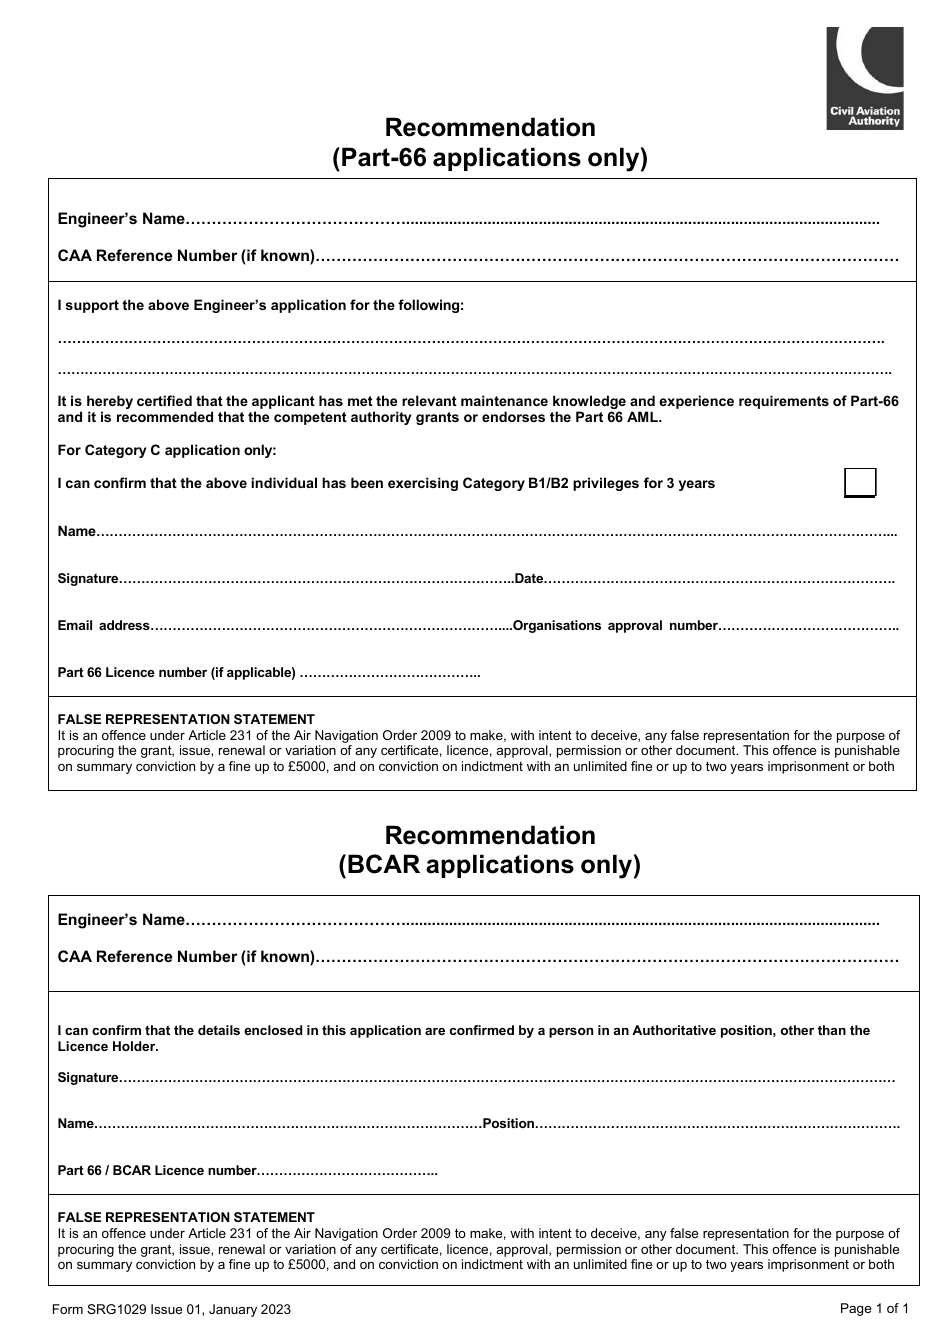 Form SRG1029 Recommendation Attachment for Bcar and Part-66 Applications - United Kingdom, Page 1